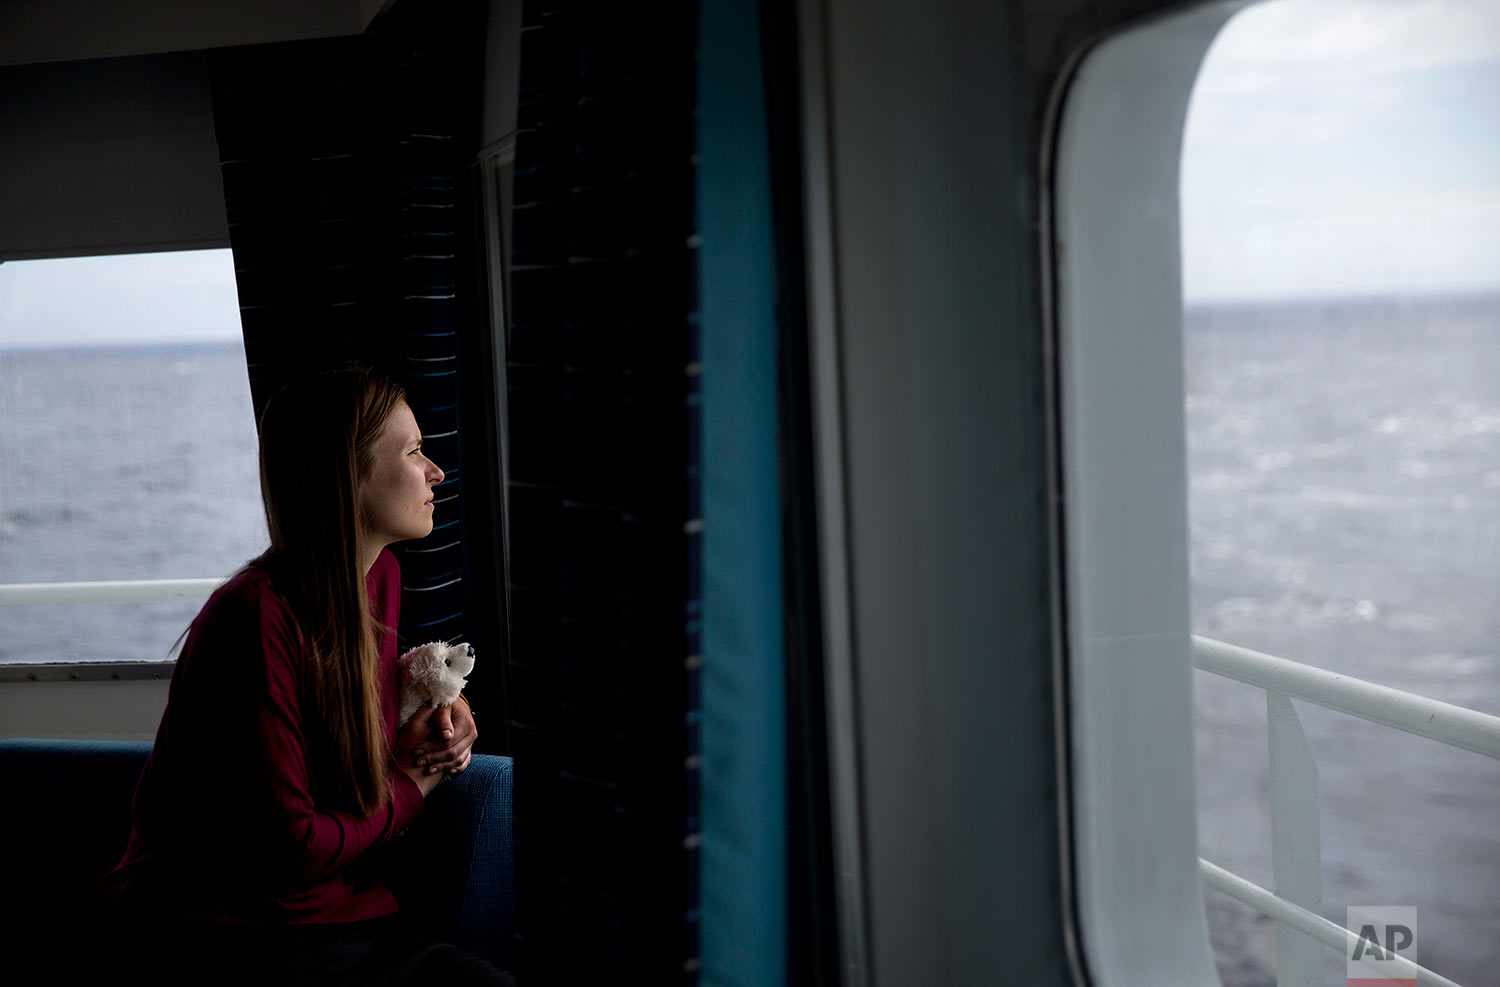  Researcher Daria Gritsenko holds her stuffed polar bear, Umka, while looking out from the Finnish icebreaker MSV Nordica as it sails the North Pacific Ocean to traverse the Northwest Passage through the Canadian Arctic Archipelago Monday, July 10, 2